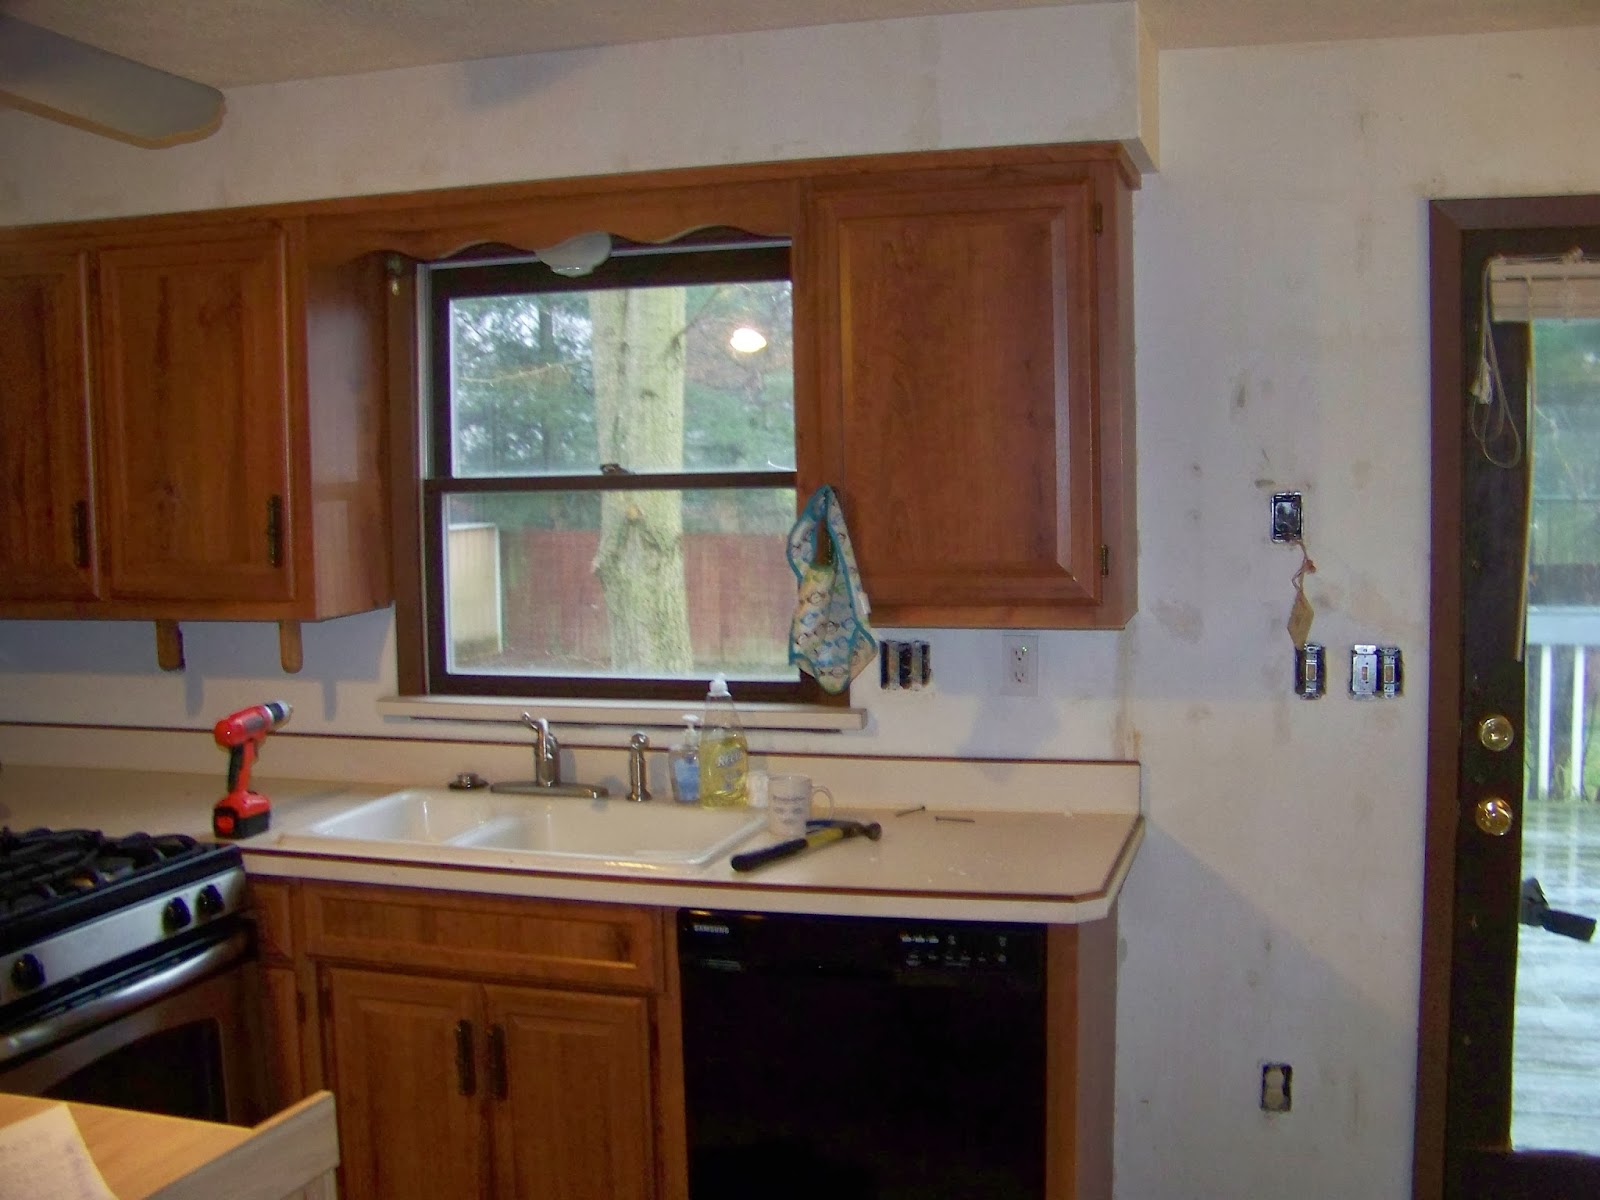 the old cabinets and counters